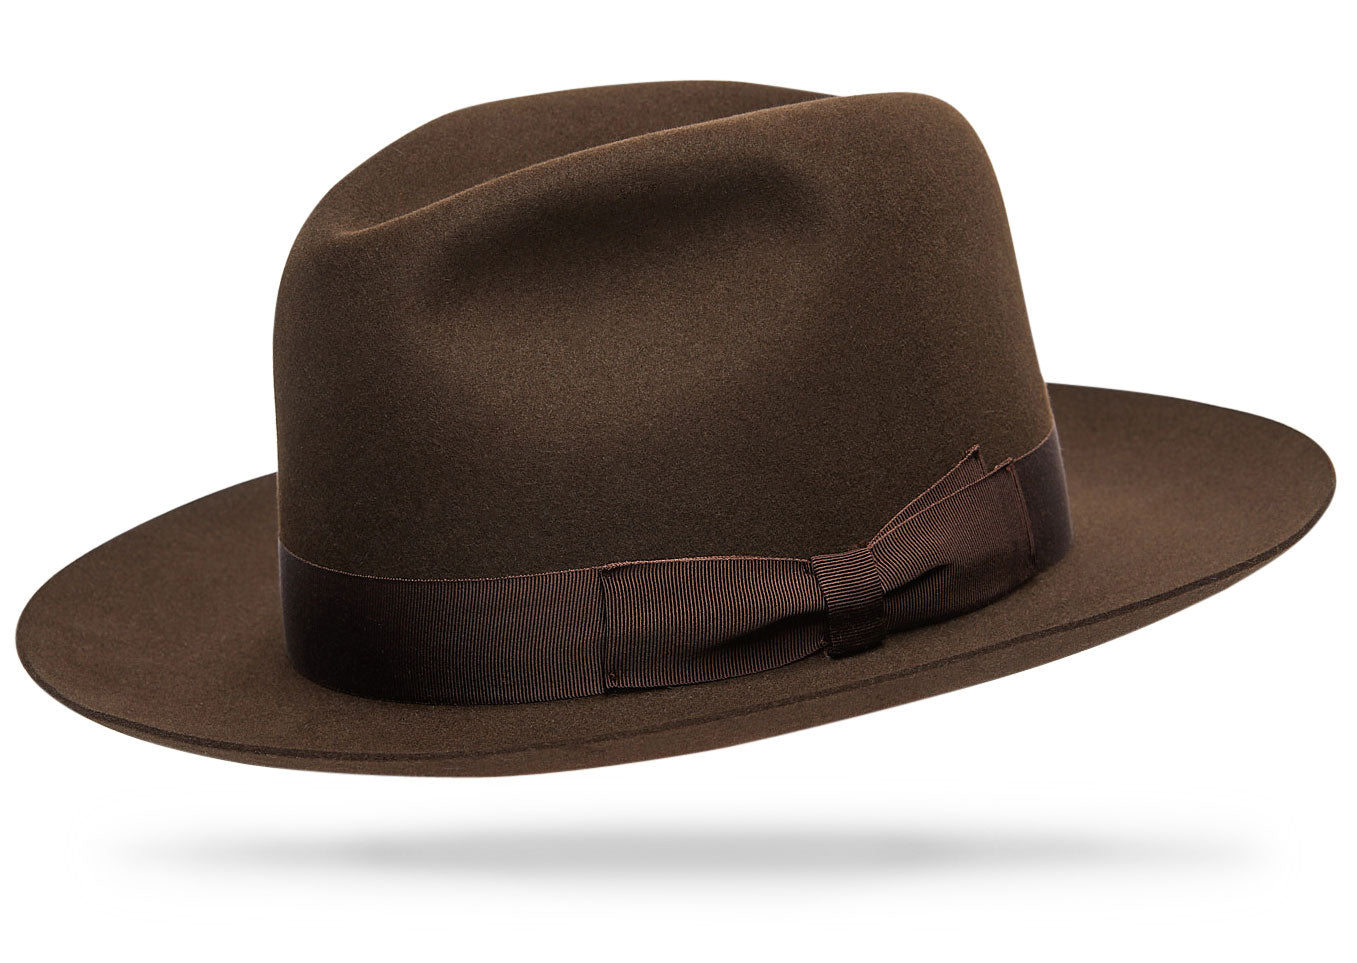 Design
The explorer is ready for any temperament. This style is suitable for anything. Our W&W all-time favorite. 
Material
100% Hare Fur Felt sustainably acquired
Specifications
With a modest 2 5/8” brim and 4” crown, this style is suitable for anything.